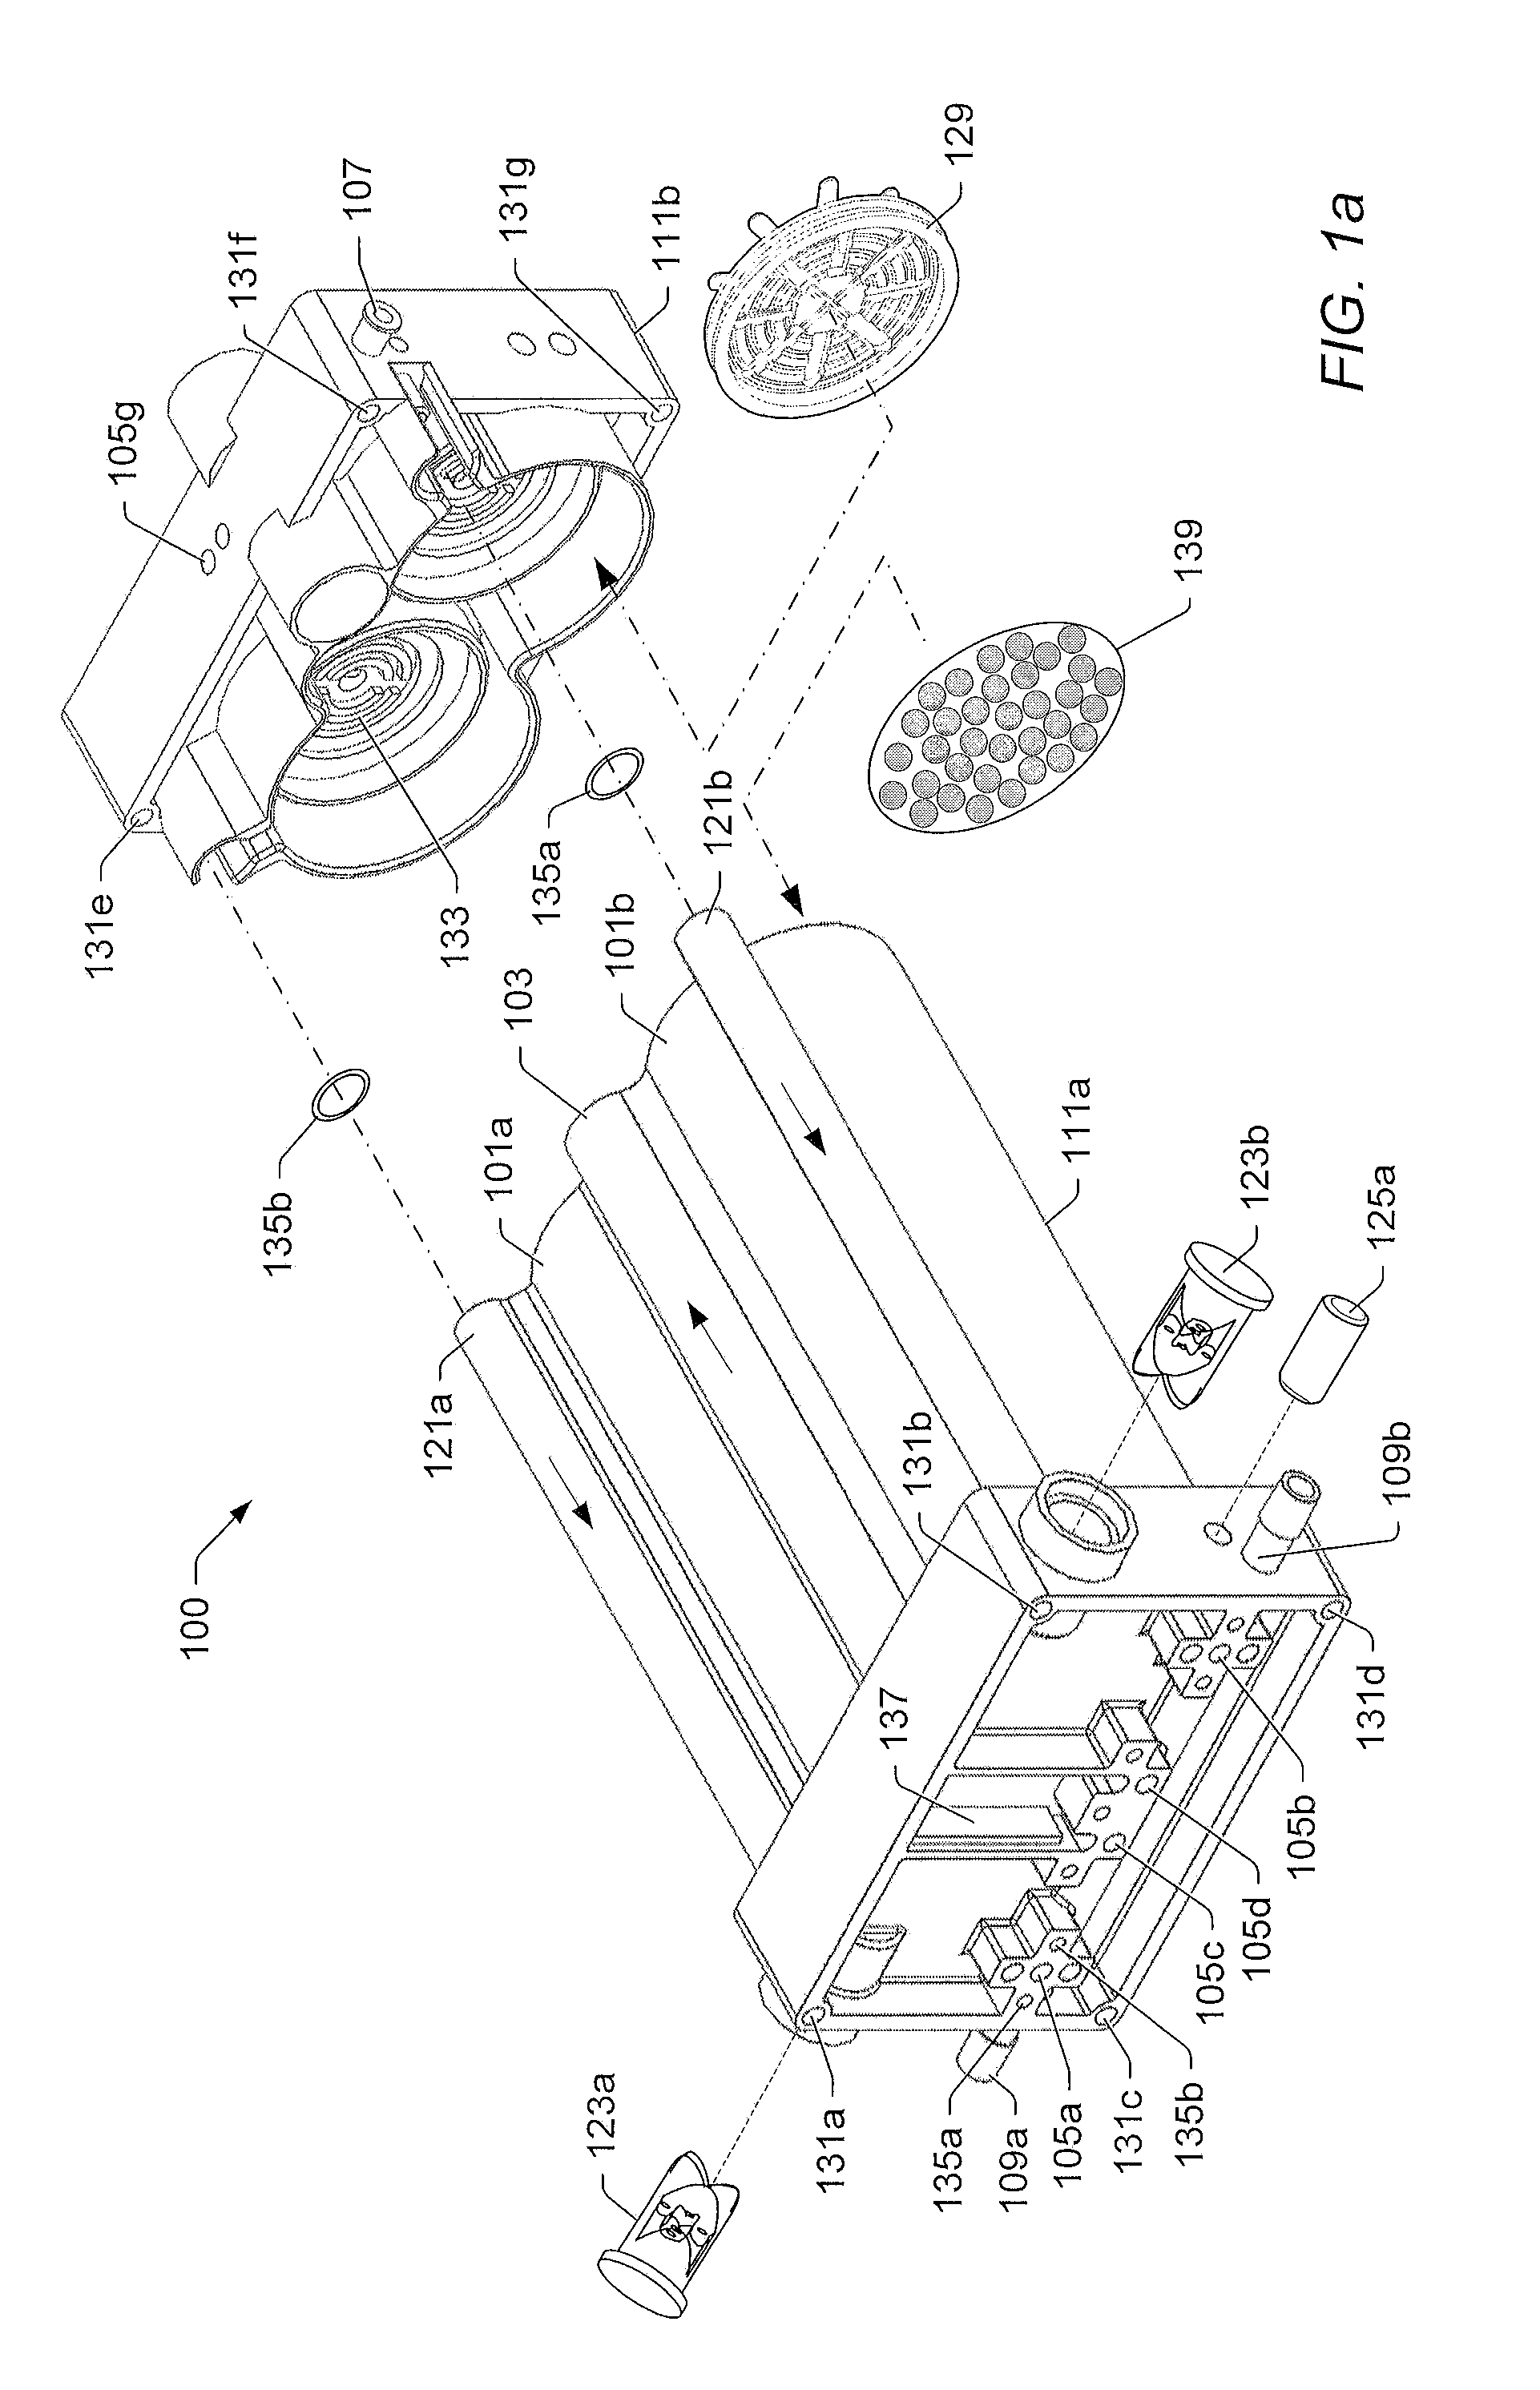 Oxygen concentrator apparatus and method of delivering pulses of oxygen